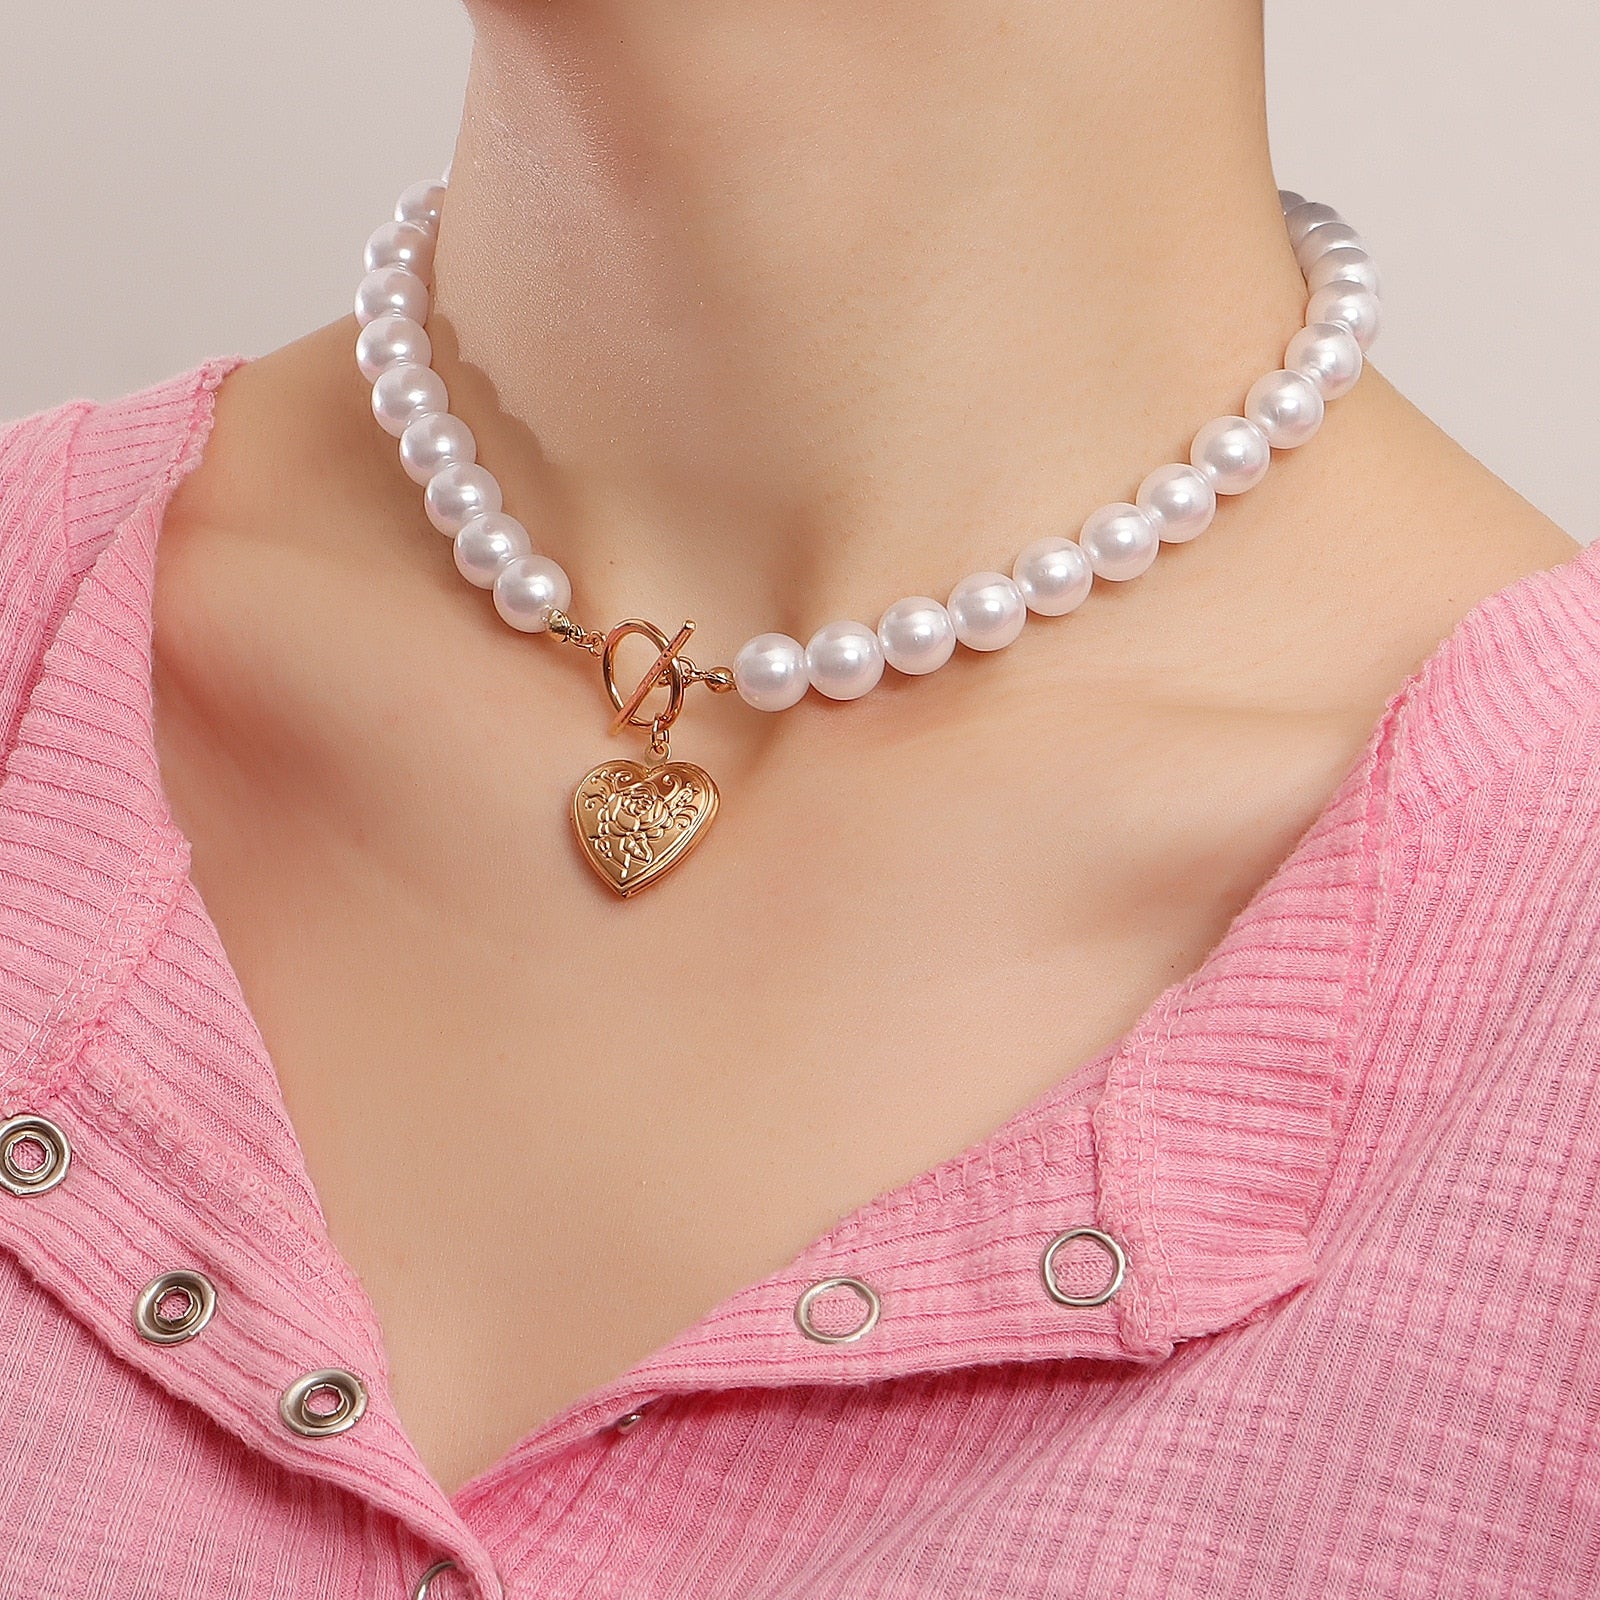 Maytrends Simple Imitation Pearls Chain Choker For Women Vinatge Gold Color Rose Heart Pendant Necklace Women Collar Jewelry Drop Shipping